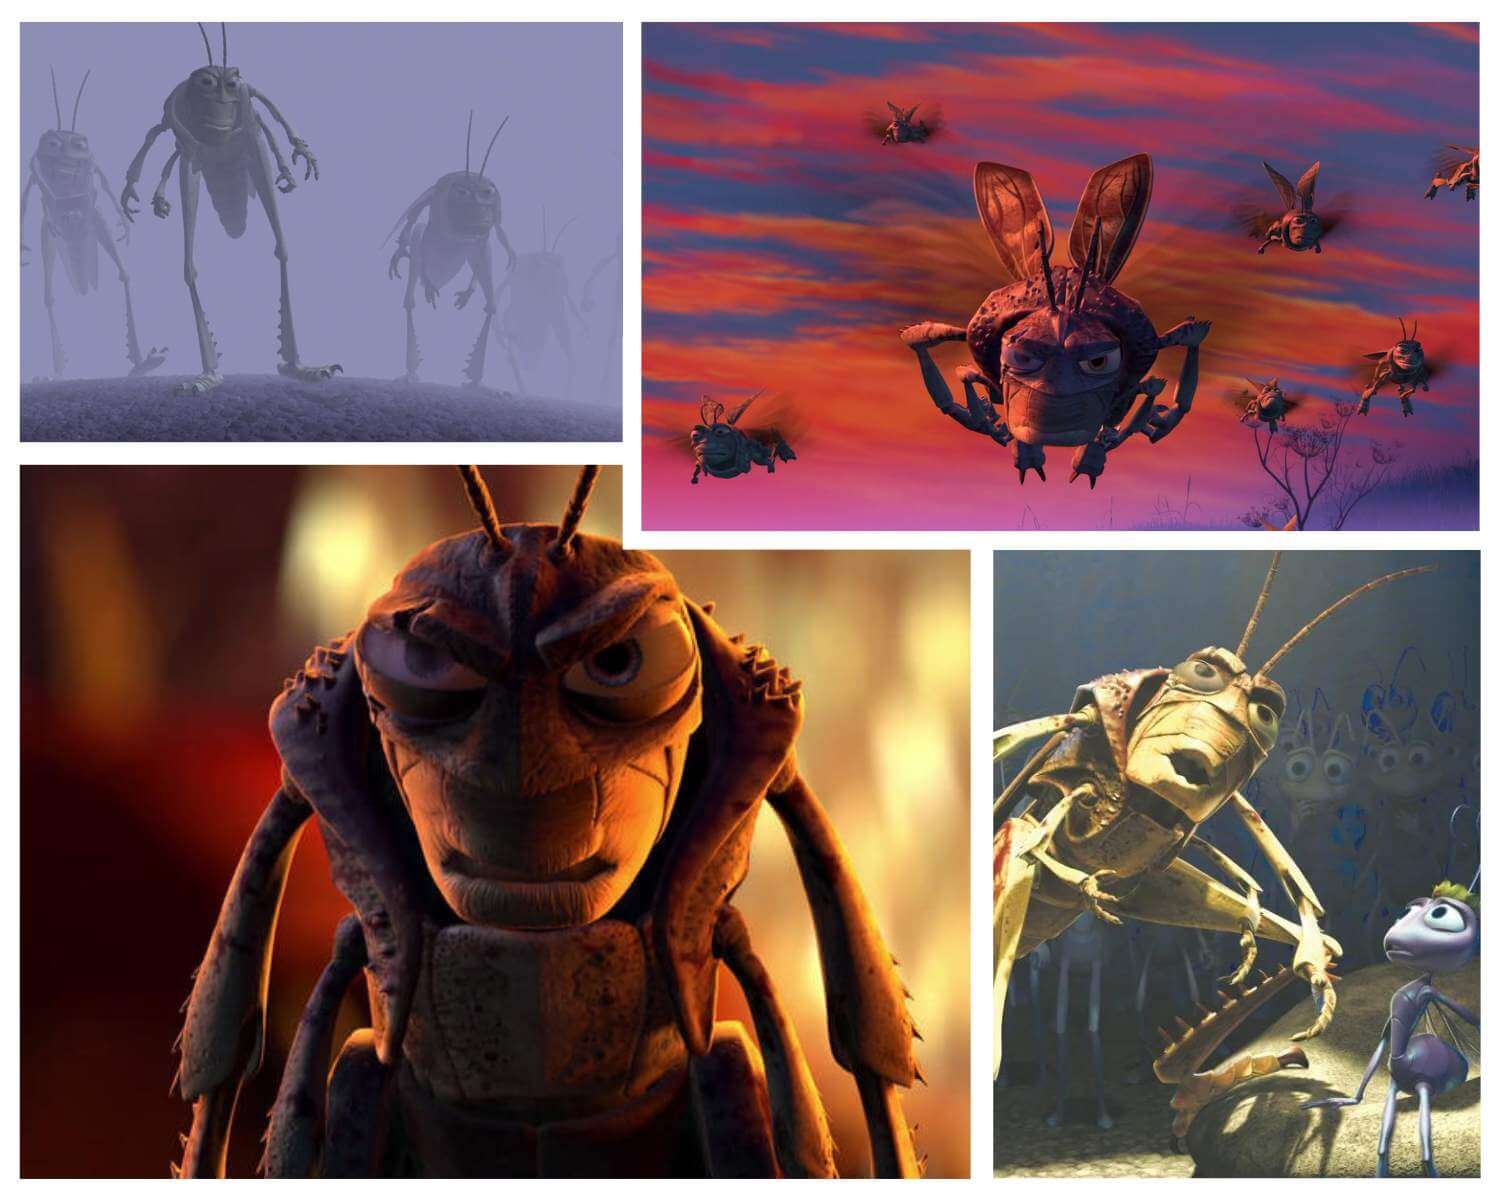 hopper from bugs life